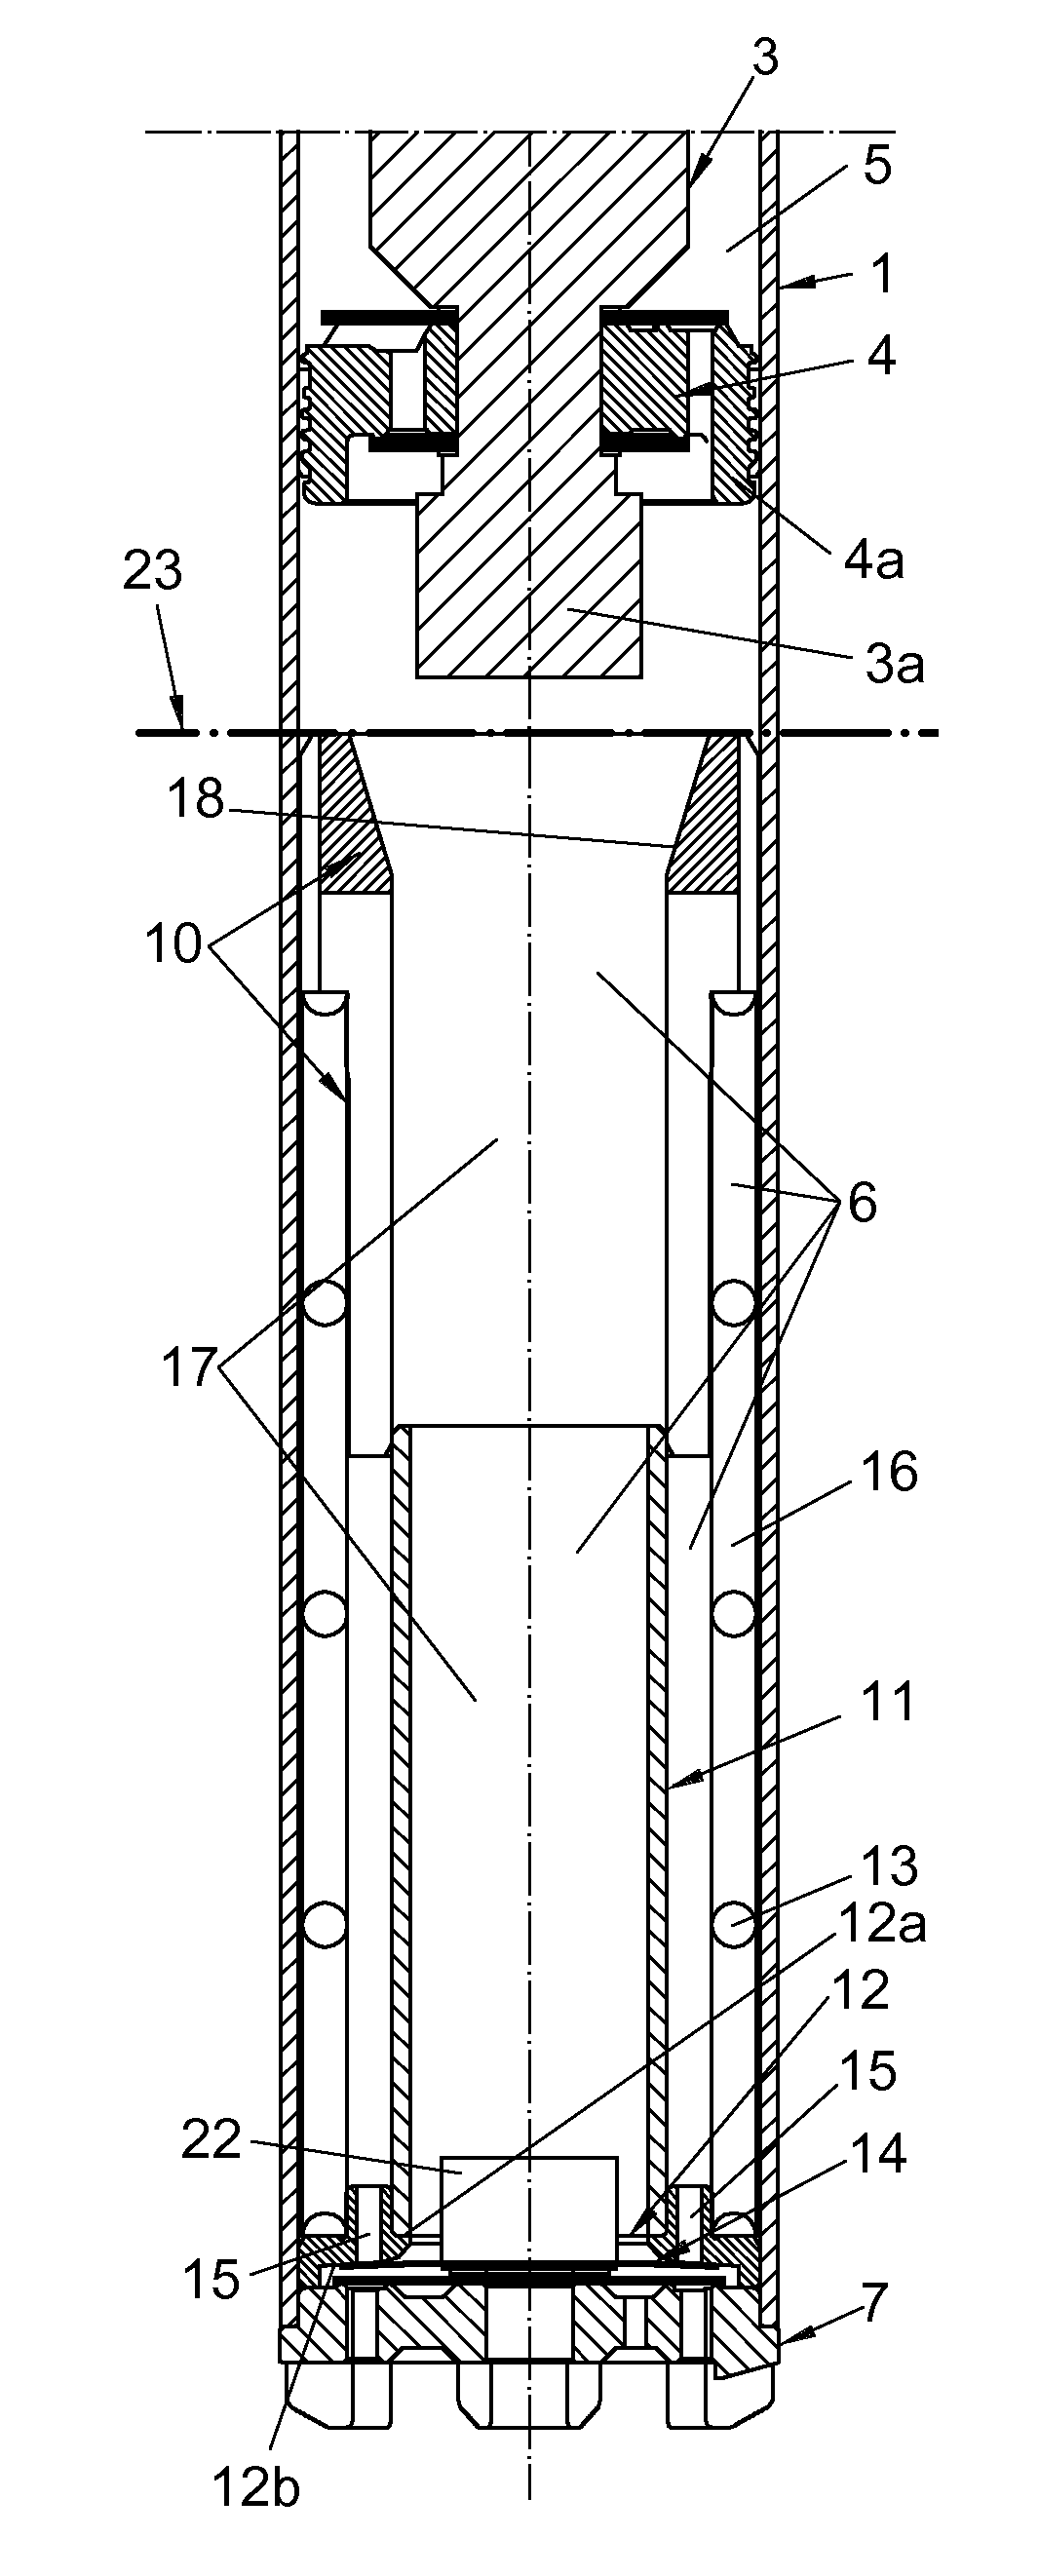 Variable load control system in a hydraulic device